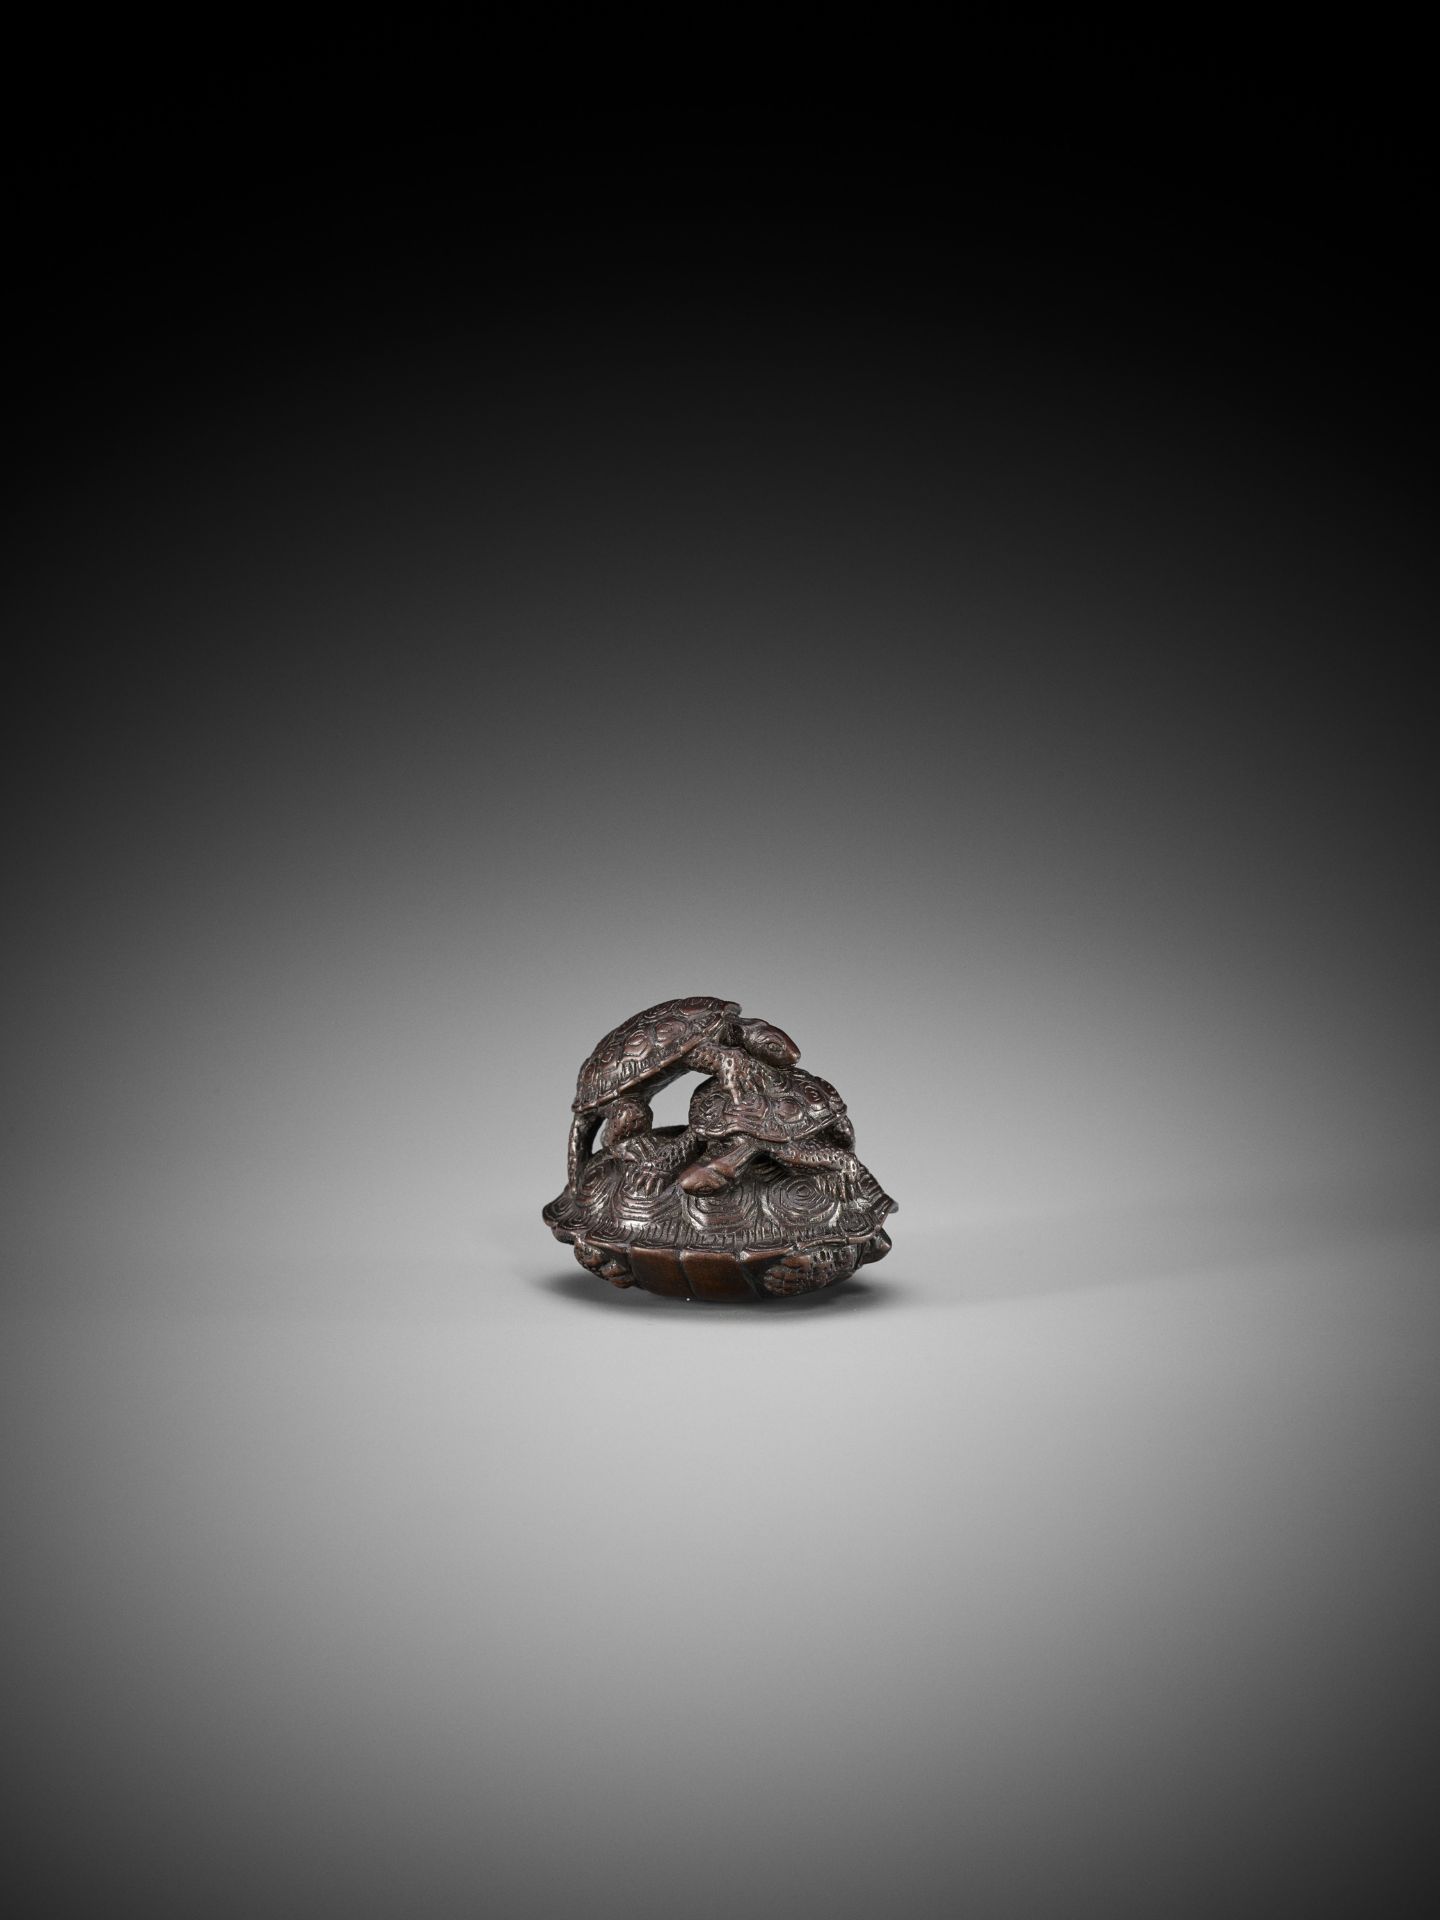 A WOOD NETSUKE OF A THREE TURTLES IN A PYRAMID - Image 3 of 8